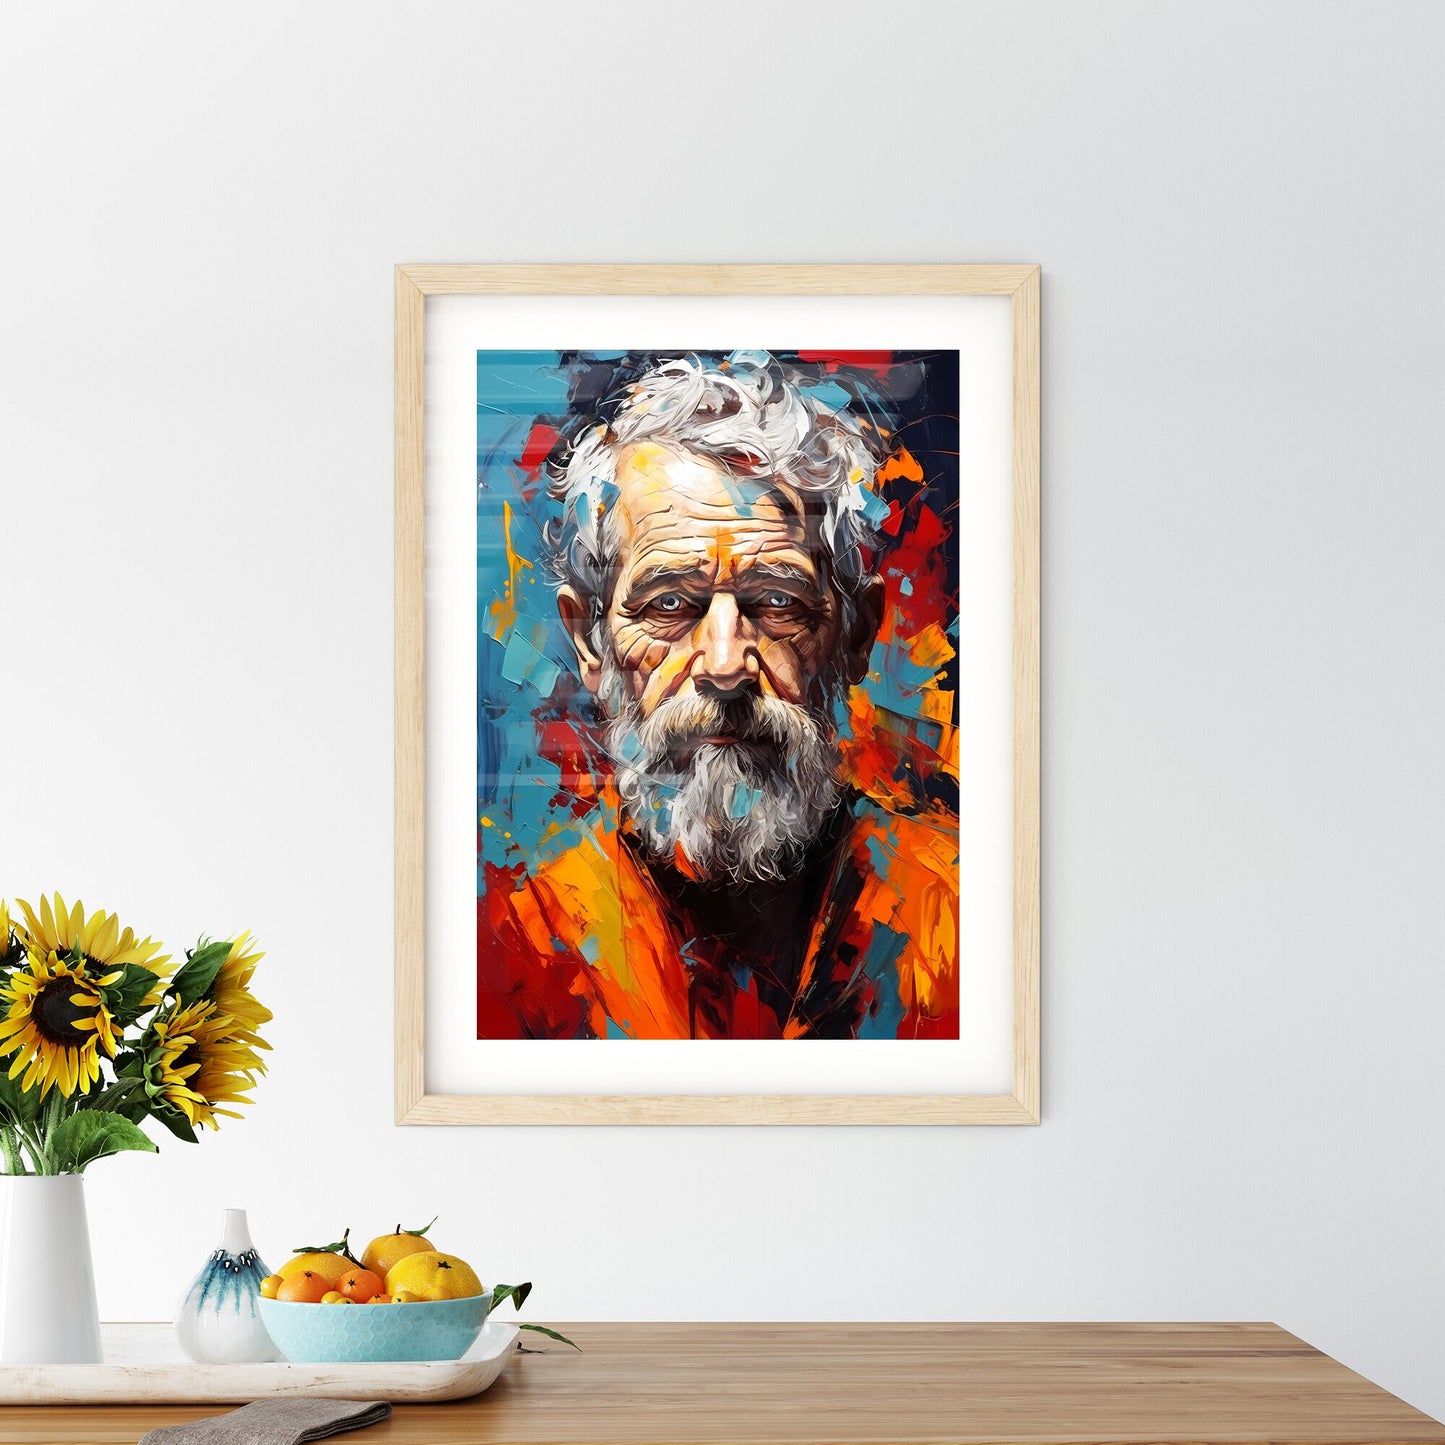 Aristotle - A Painting Of A Man With A Beard Default Title